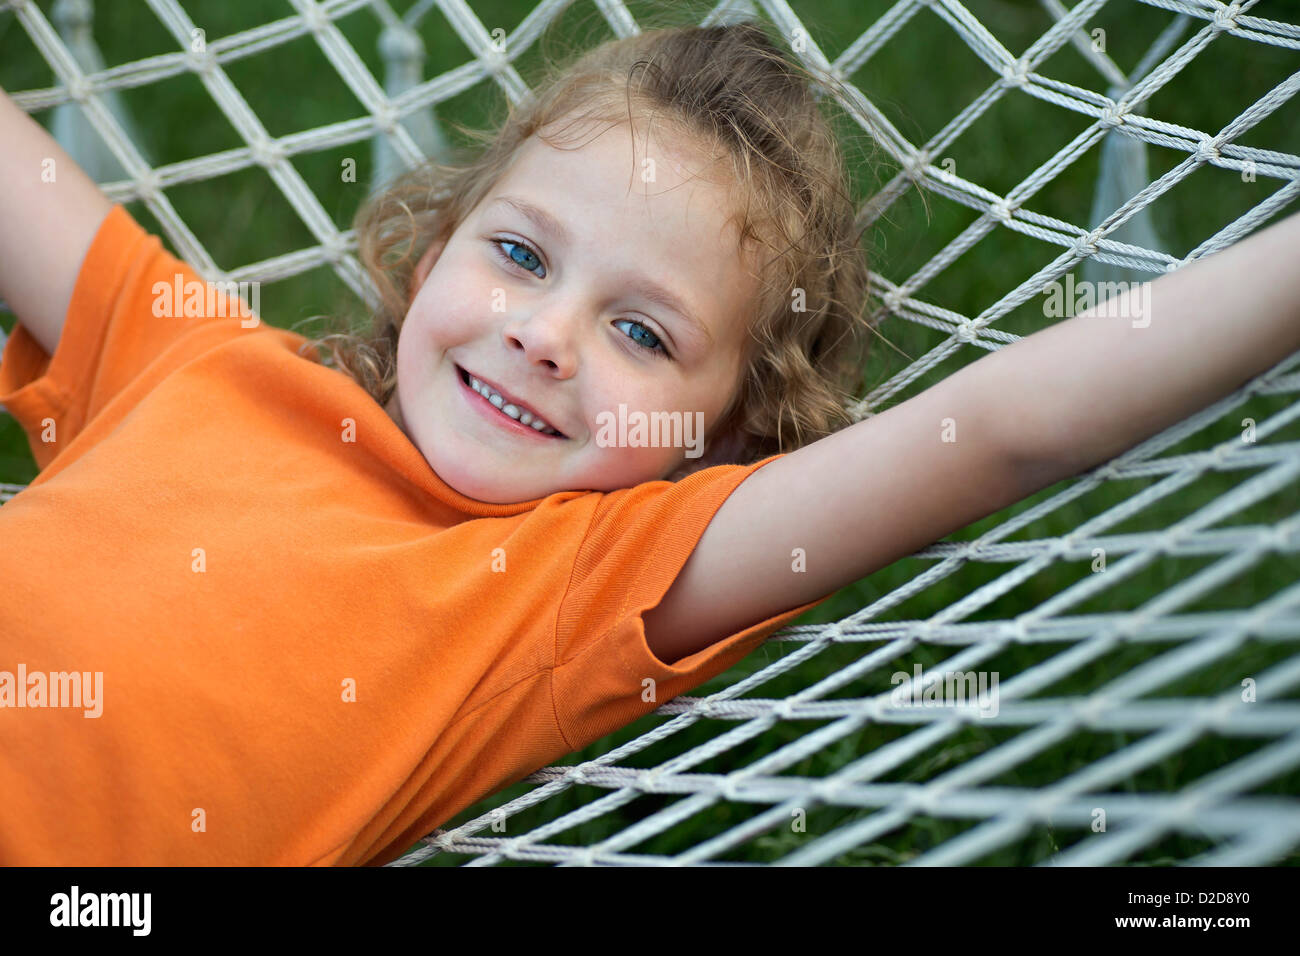 A young cheerful girl lying on a hammock Stock Photo